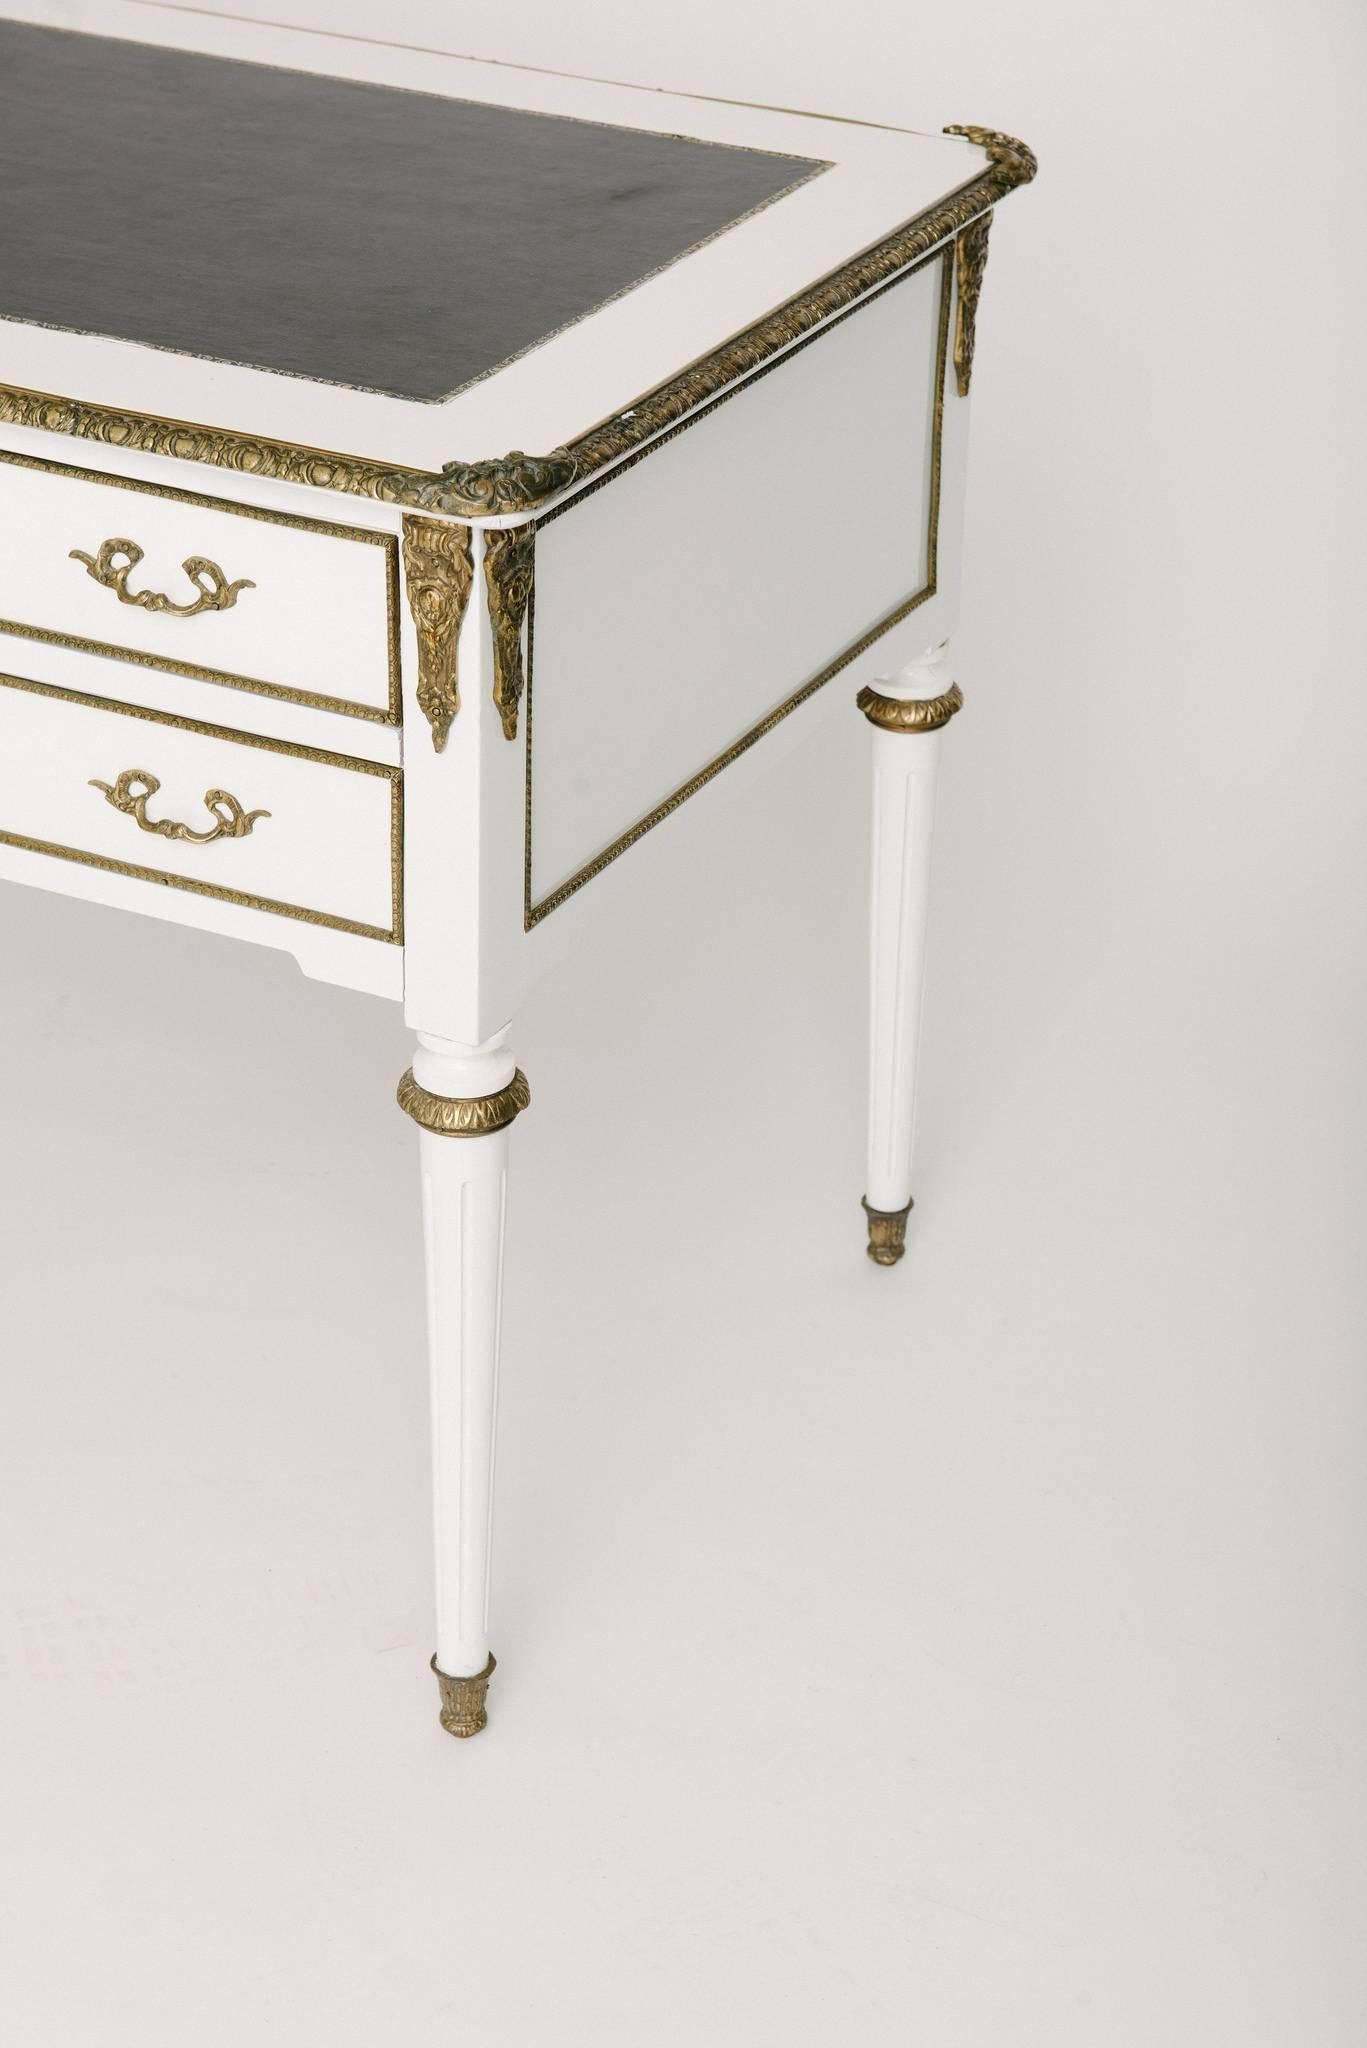 A vintage Louis XVI style white lacquered desk with ormolu detail and black leather top.